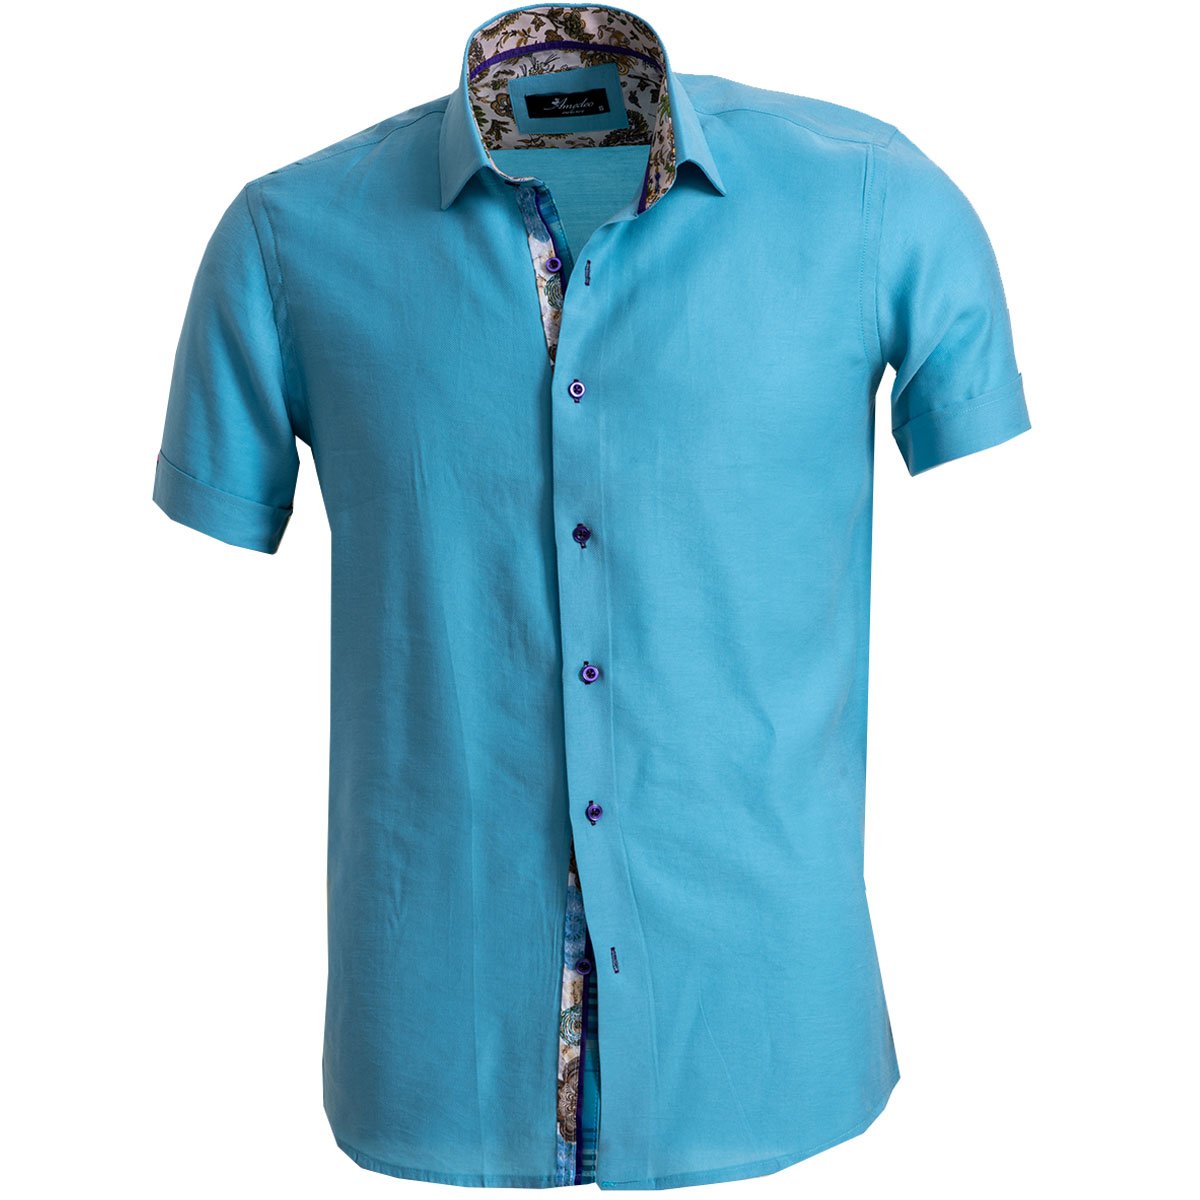 Solid Turquoise Blue Mens Short Sleeve ...